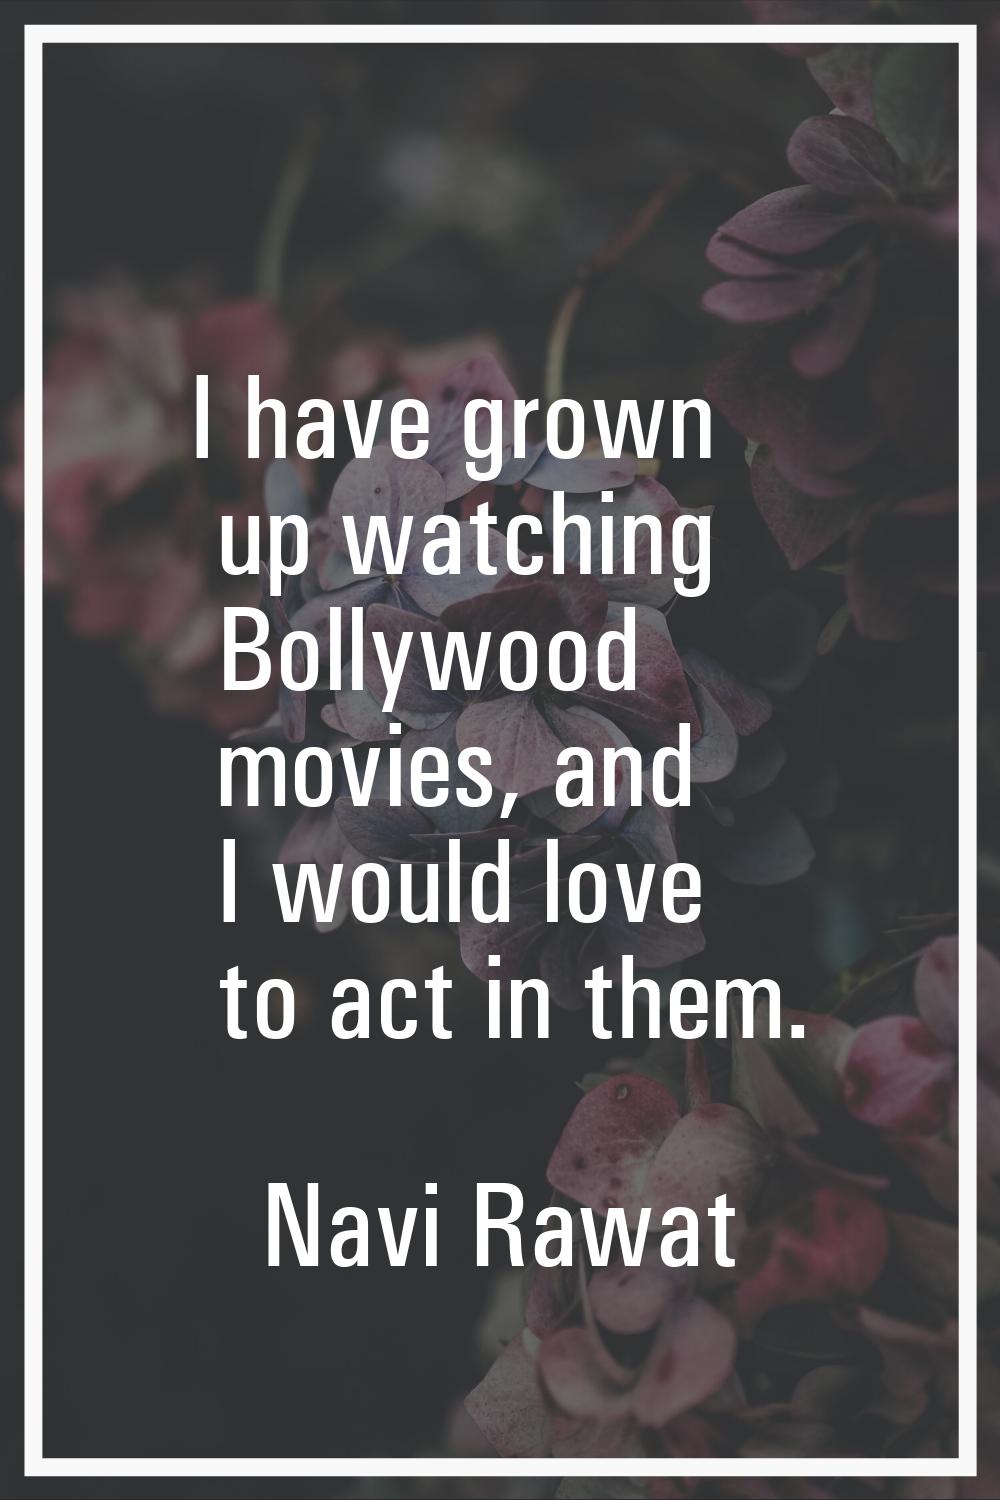 I have grown up watching Bollywood movies, and I would love to act in them.